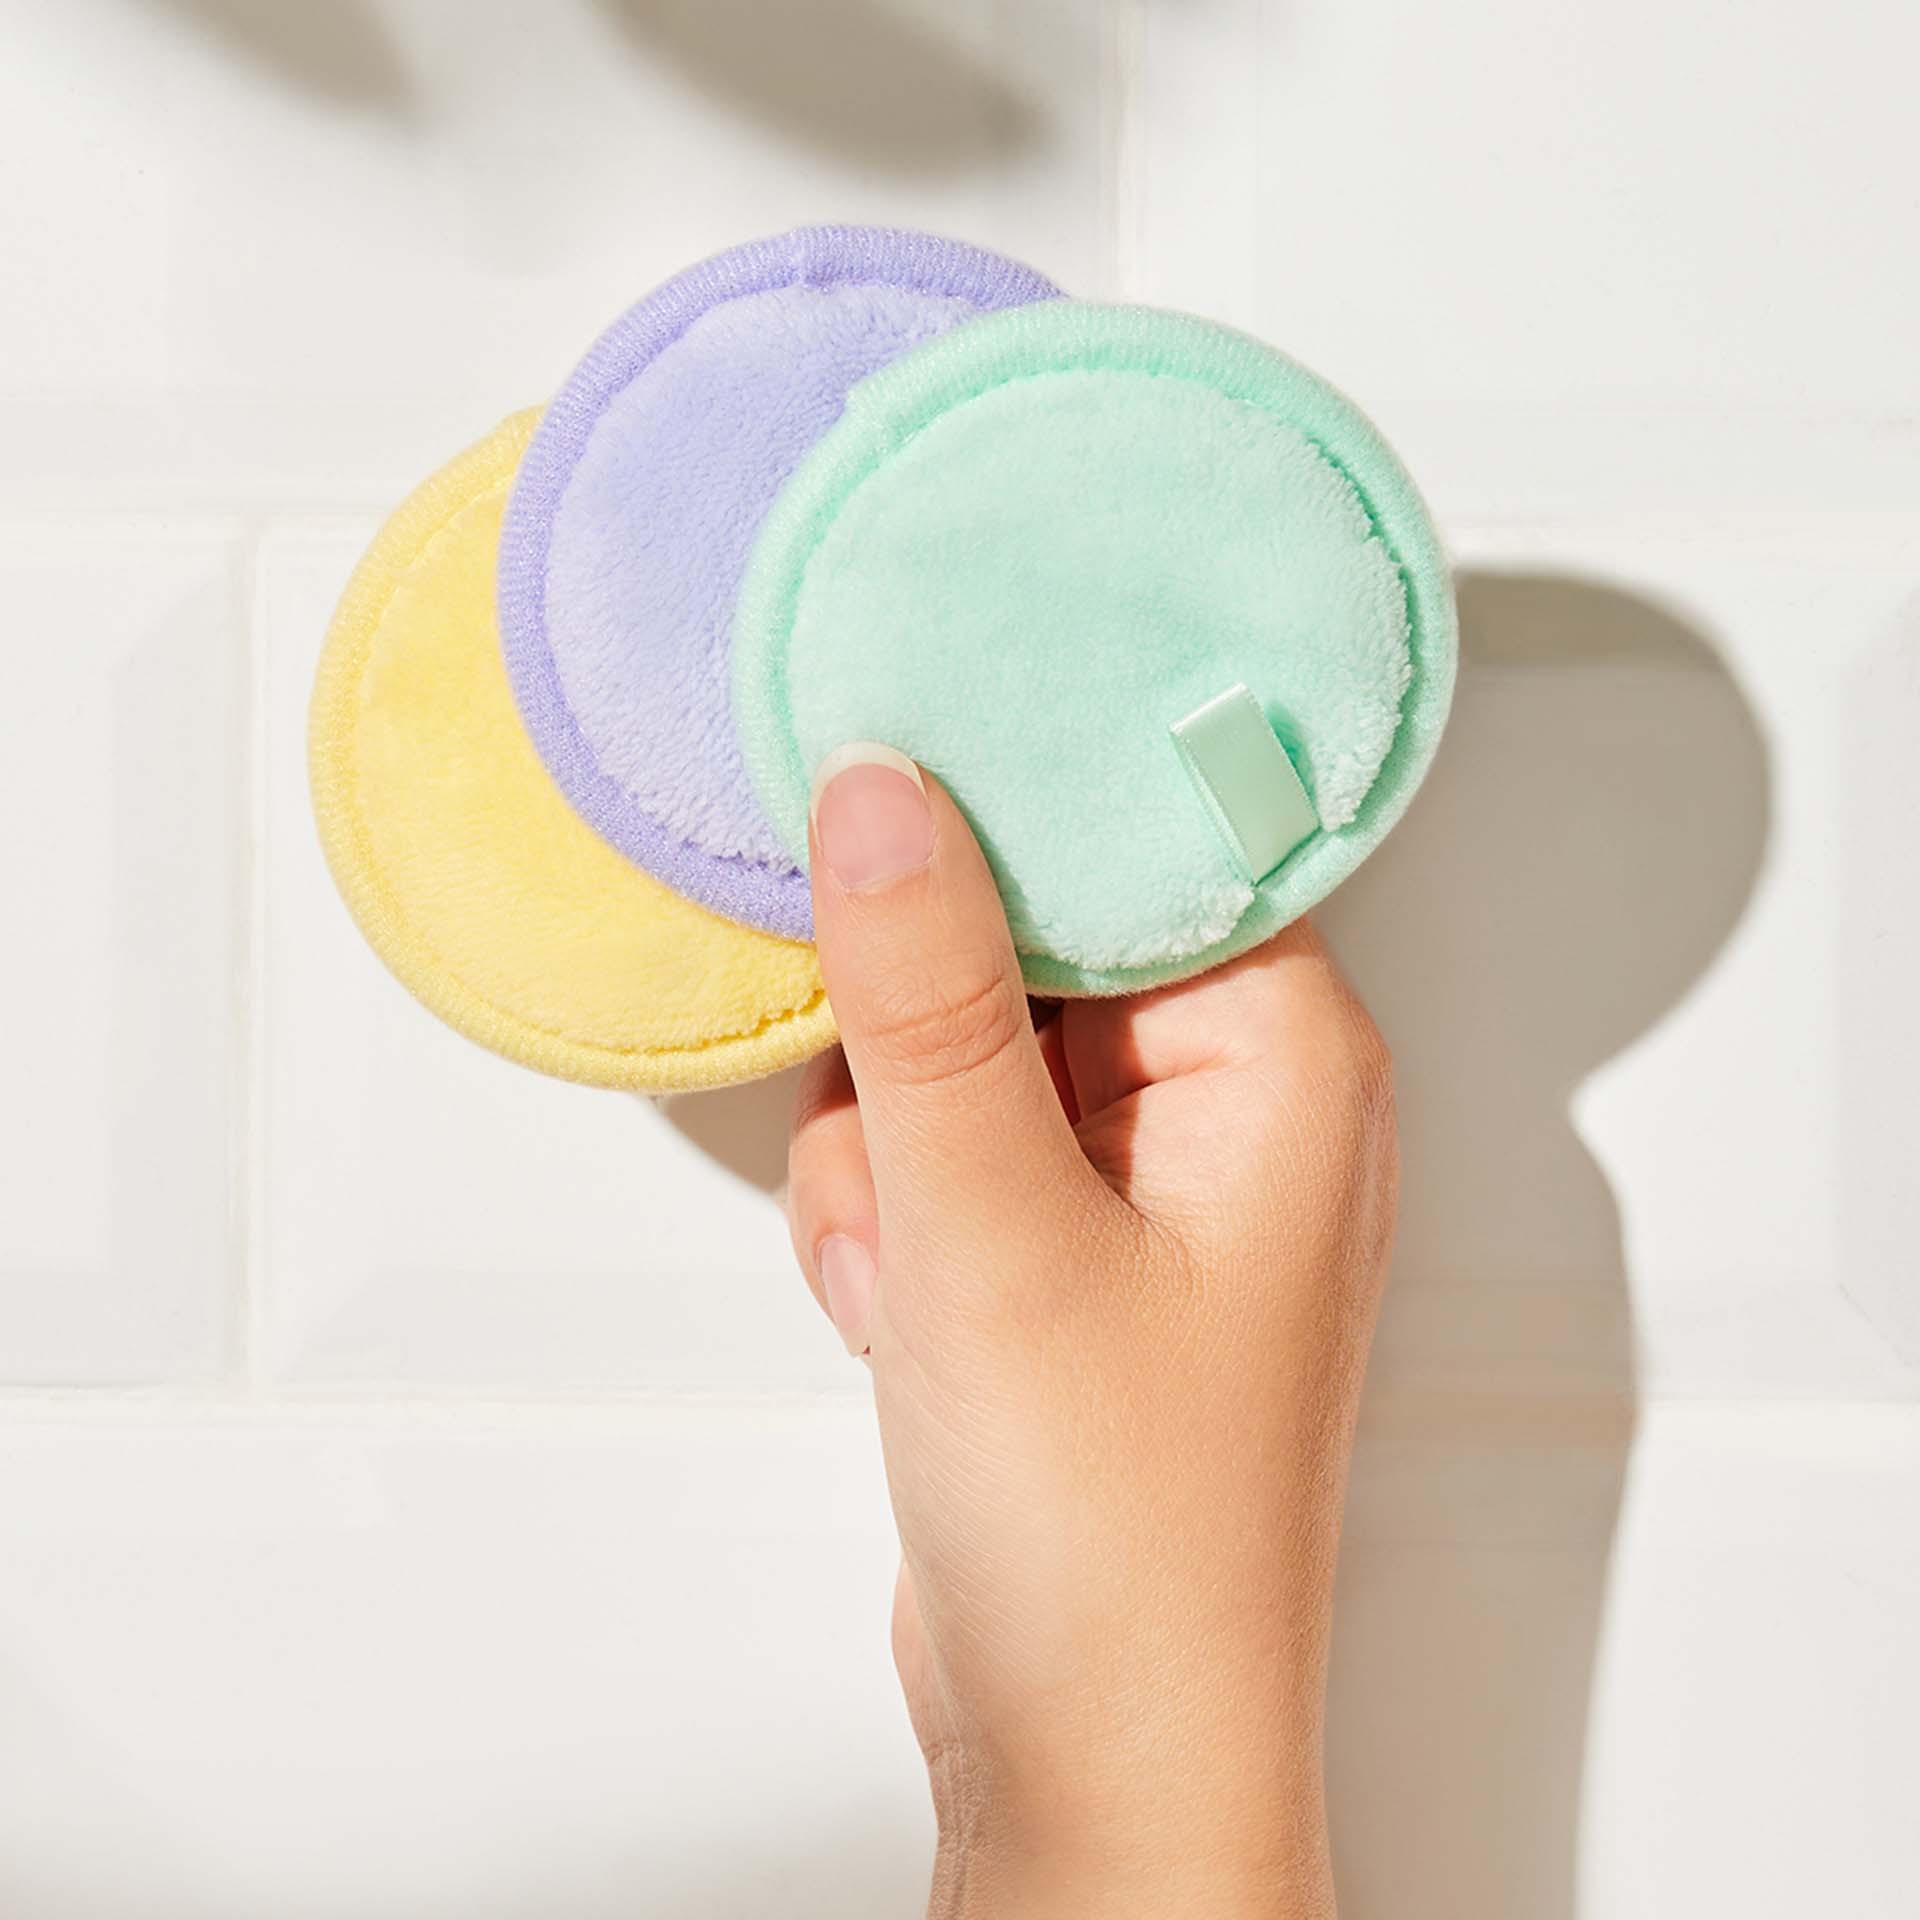 Primark Reusable Cleansing Pads